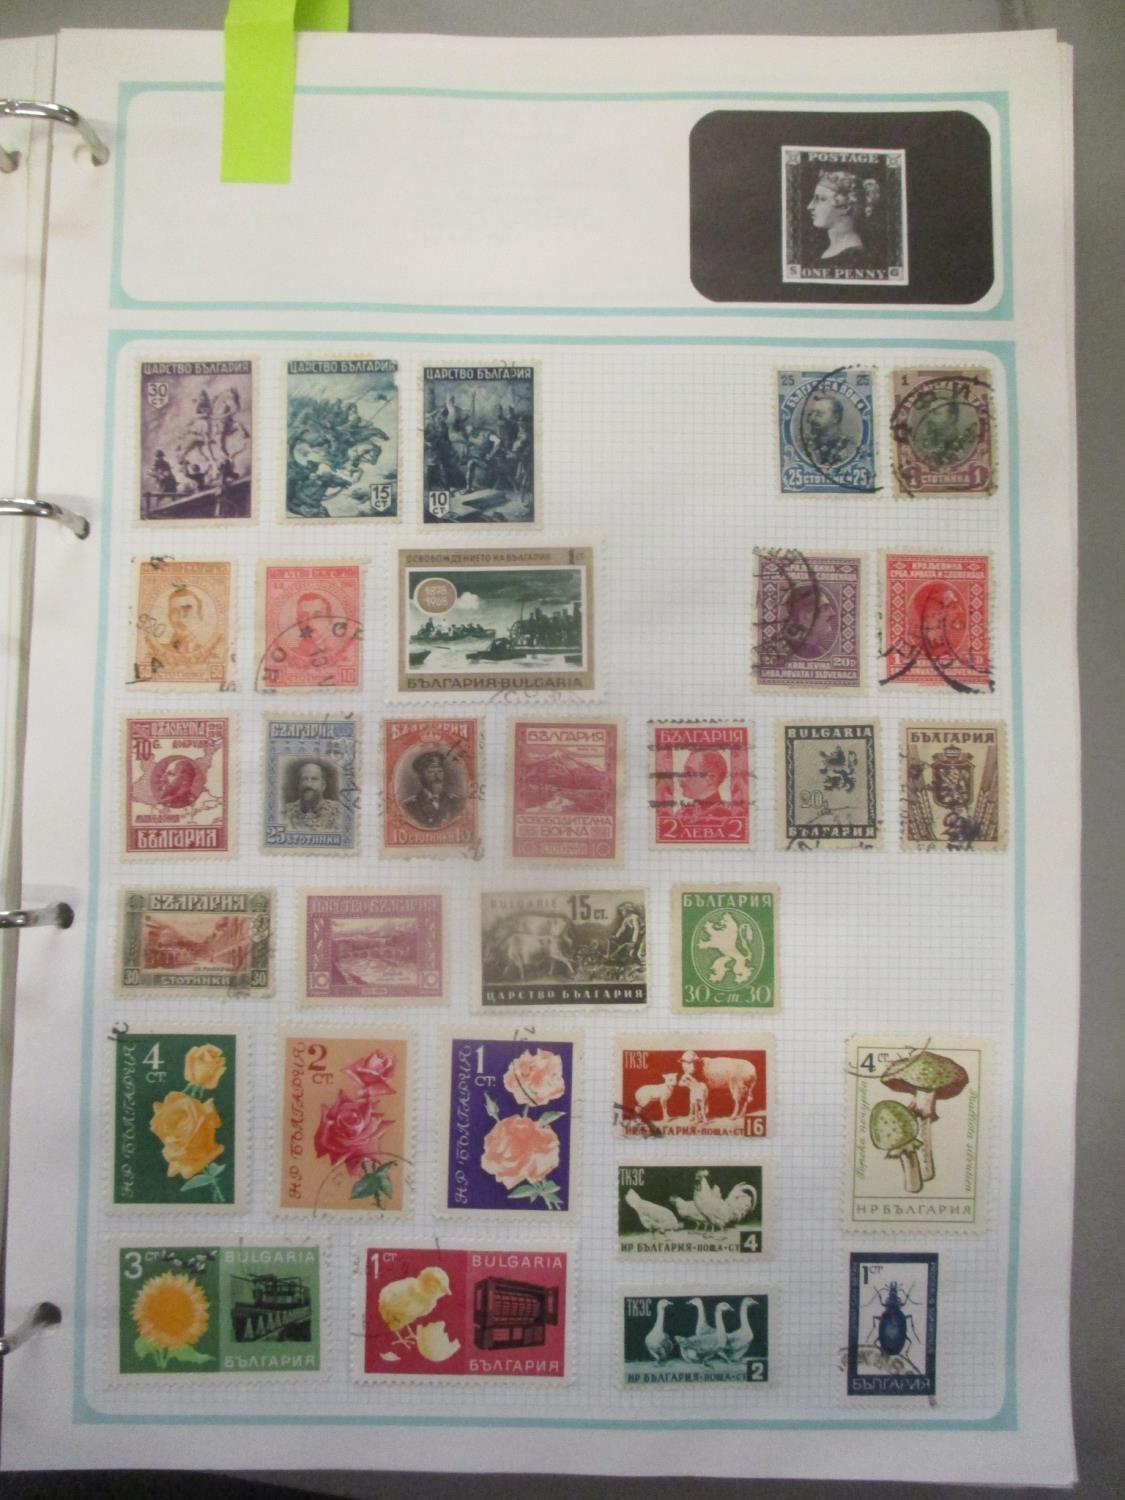 GB postage stamps (GV/GV1/Eliz) in stock books with duplication, together with three albums of - Image 6 of 11